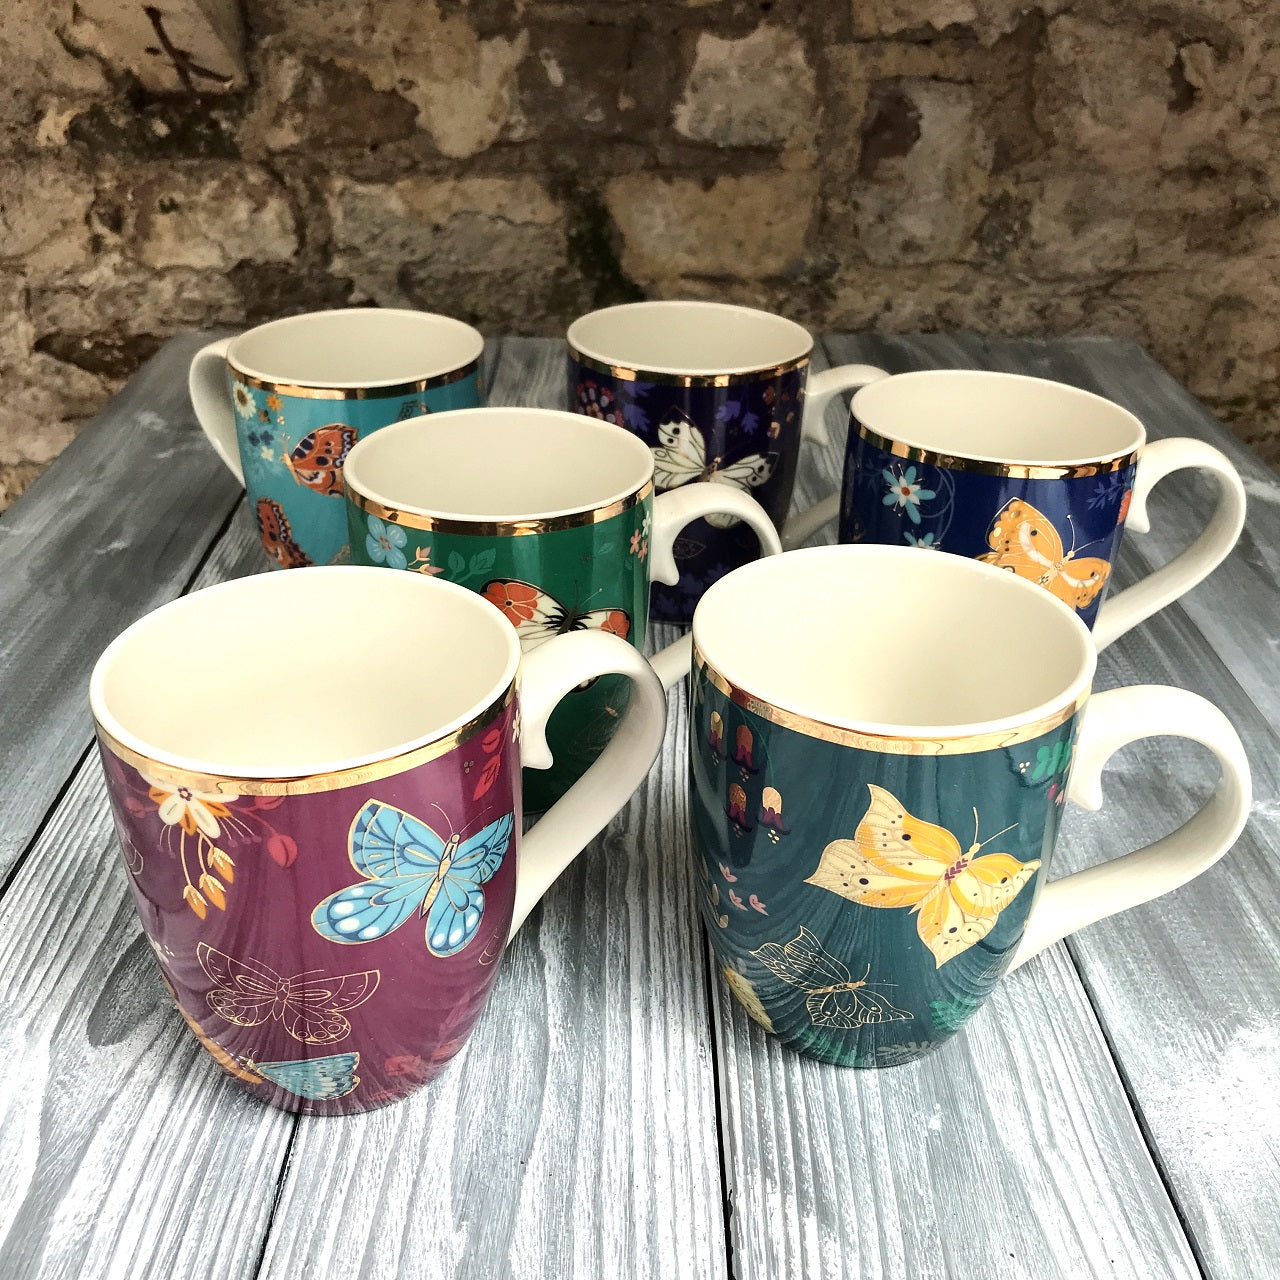 Tipperary Crystal Butterfly Set of 6 Mug Hatbox  Drawing inspiration from urban garden, the Tipperary Crystal Butterfly collection transforms an icon into something modern and unexpected. Playful and elegant, this collection draws from the inherent beauty of the butterfly.